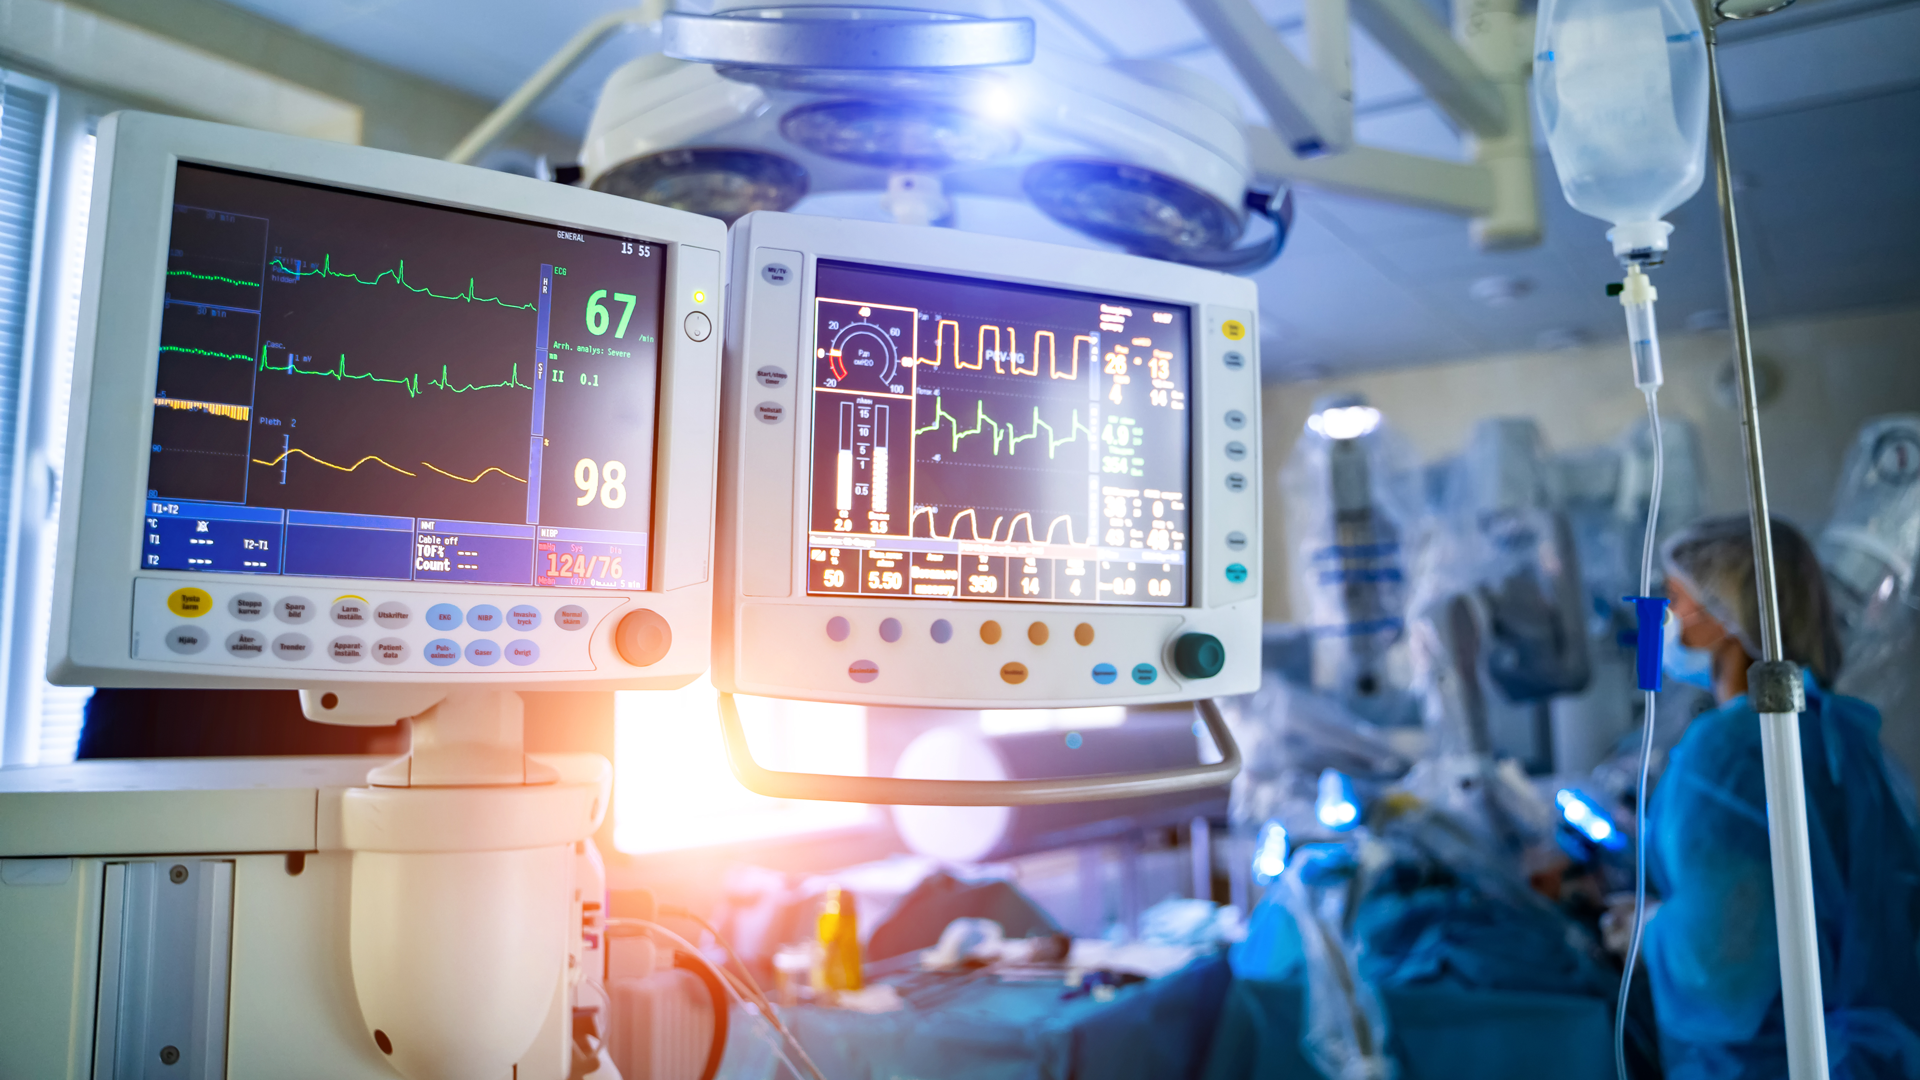 Medical devices including a ventilator and EKG are shown in an emergency room.